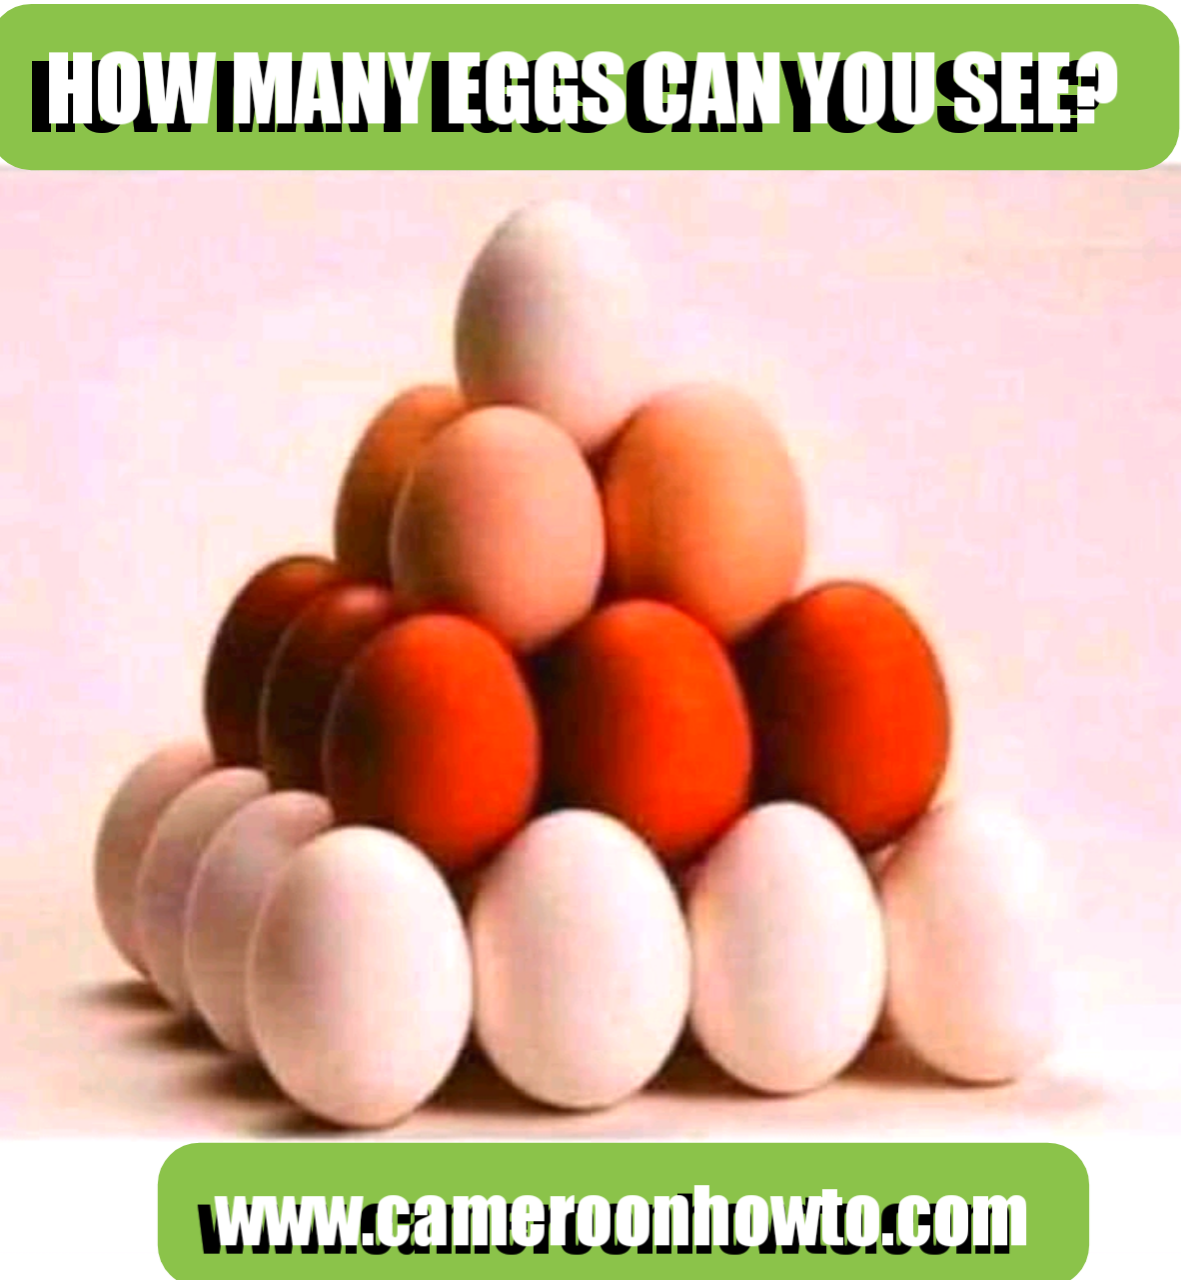 How many eggs can see"  math Puzzle answer